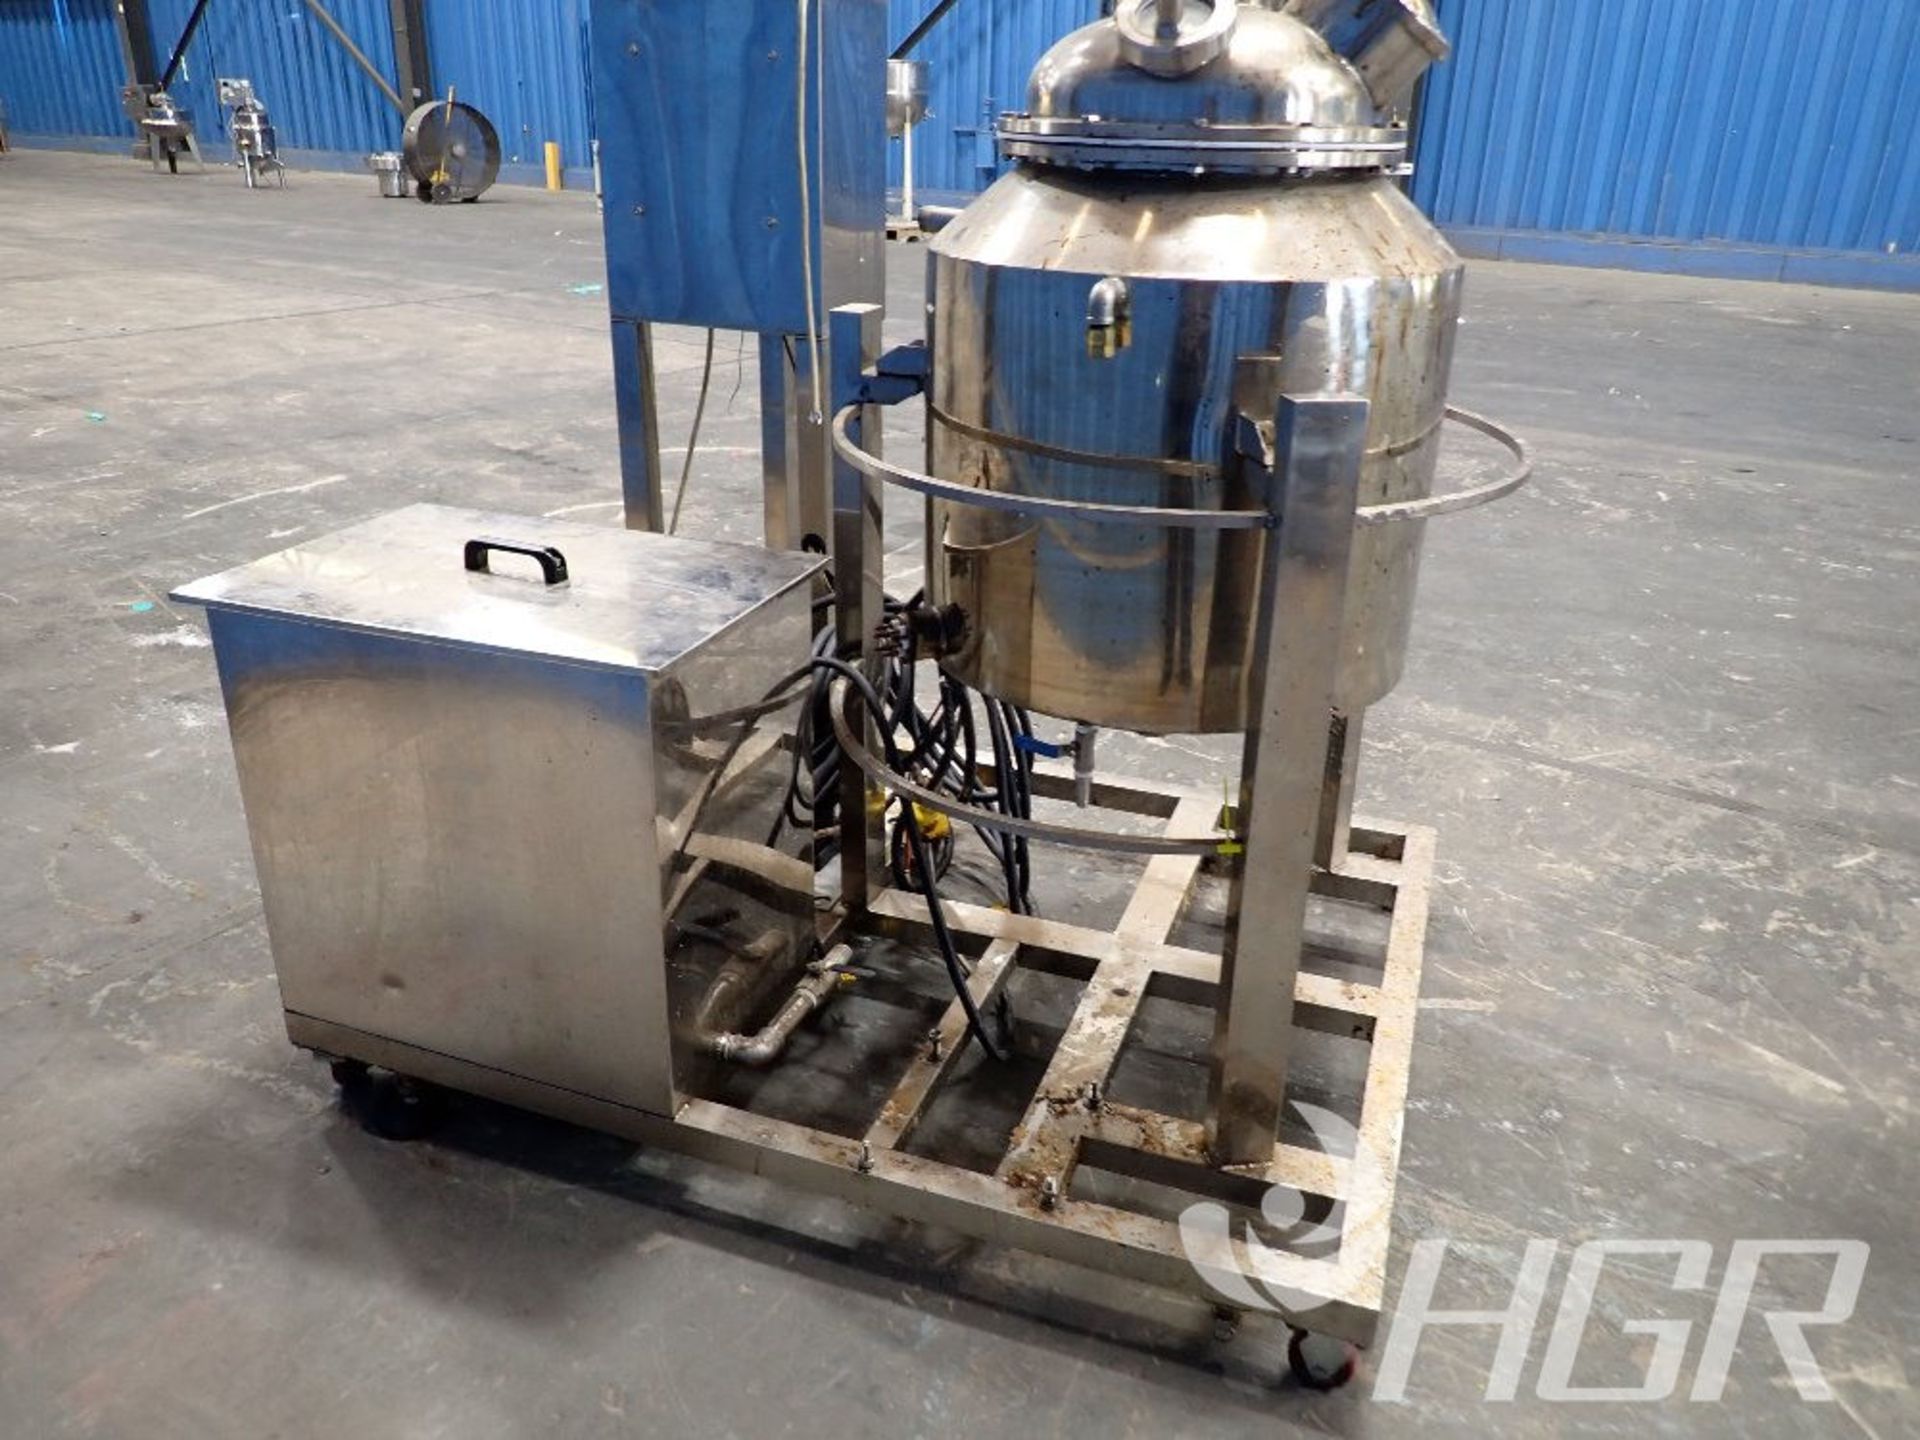 OHLSON HEATED VACUUM MELTER, Model n/a, Date: n/a; s/n n/a, Approx. Capacity: 21X30, Power: n/a, - Image 13 of 13